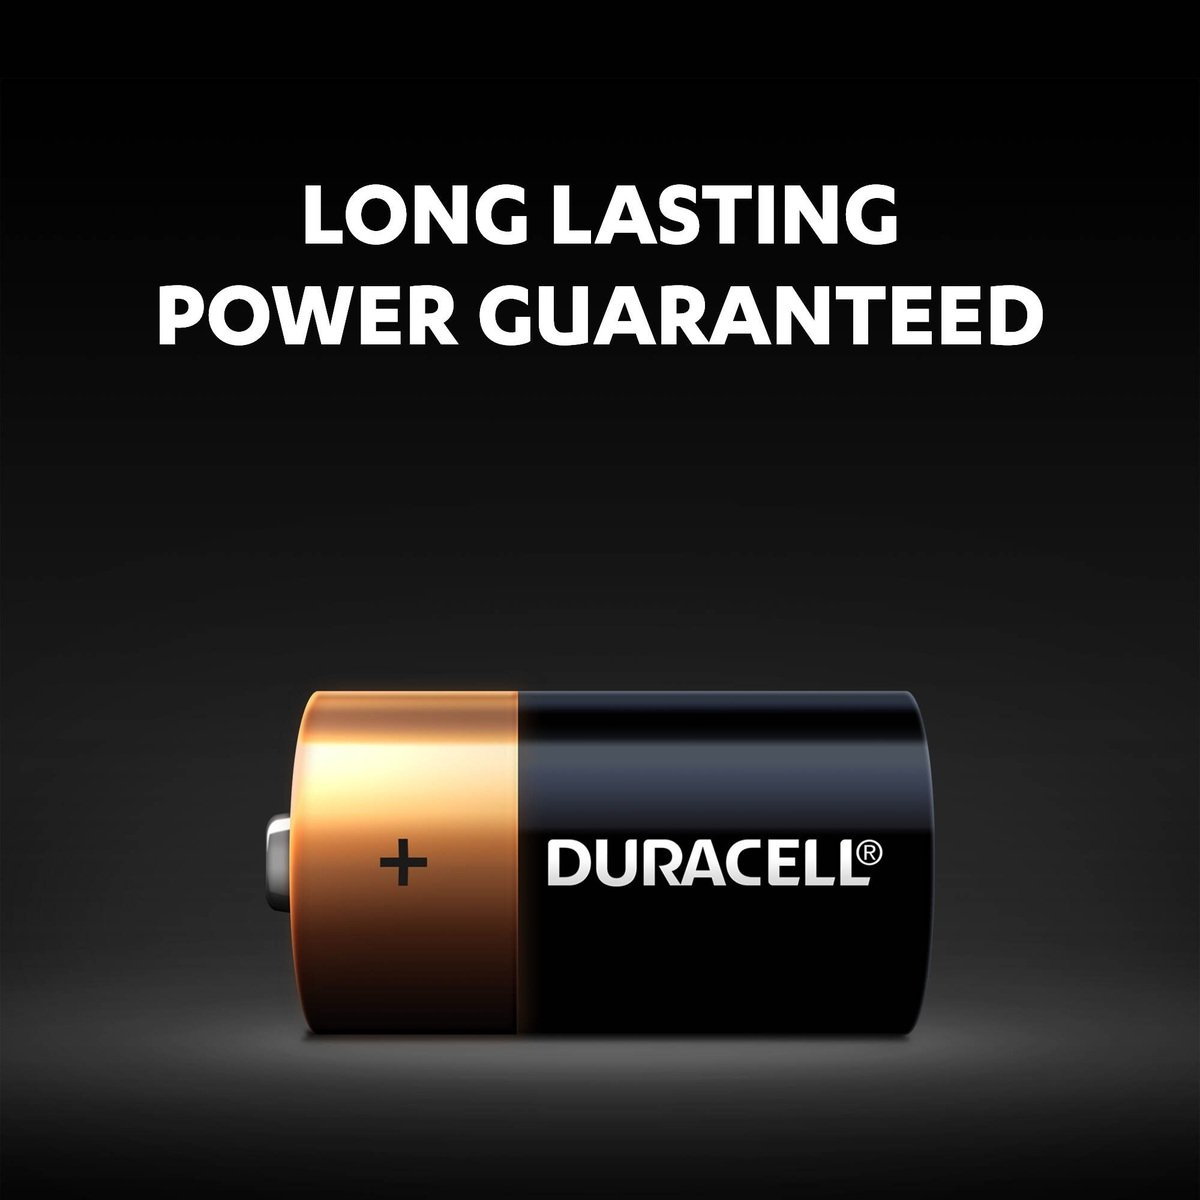 Duracell Type C Alkaline Batteries, pack of 2